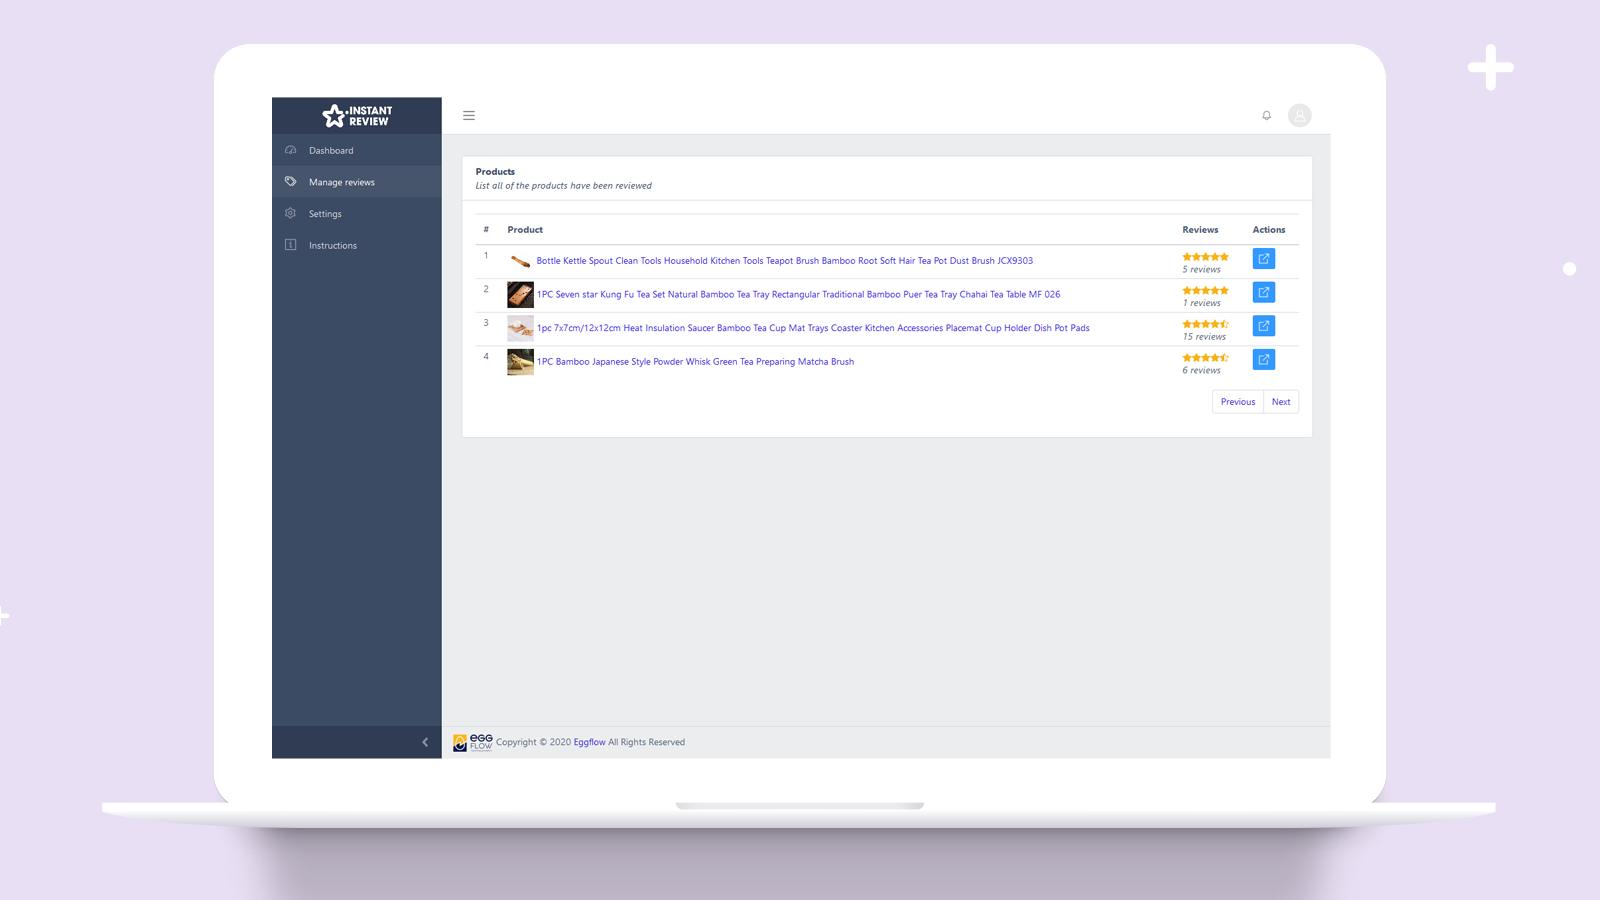 Dashboard overview about review products and product reviews